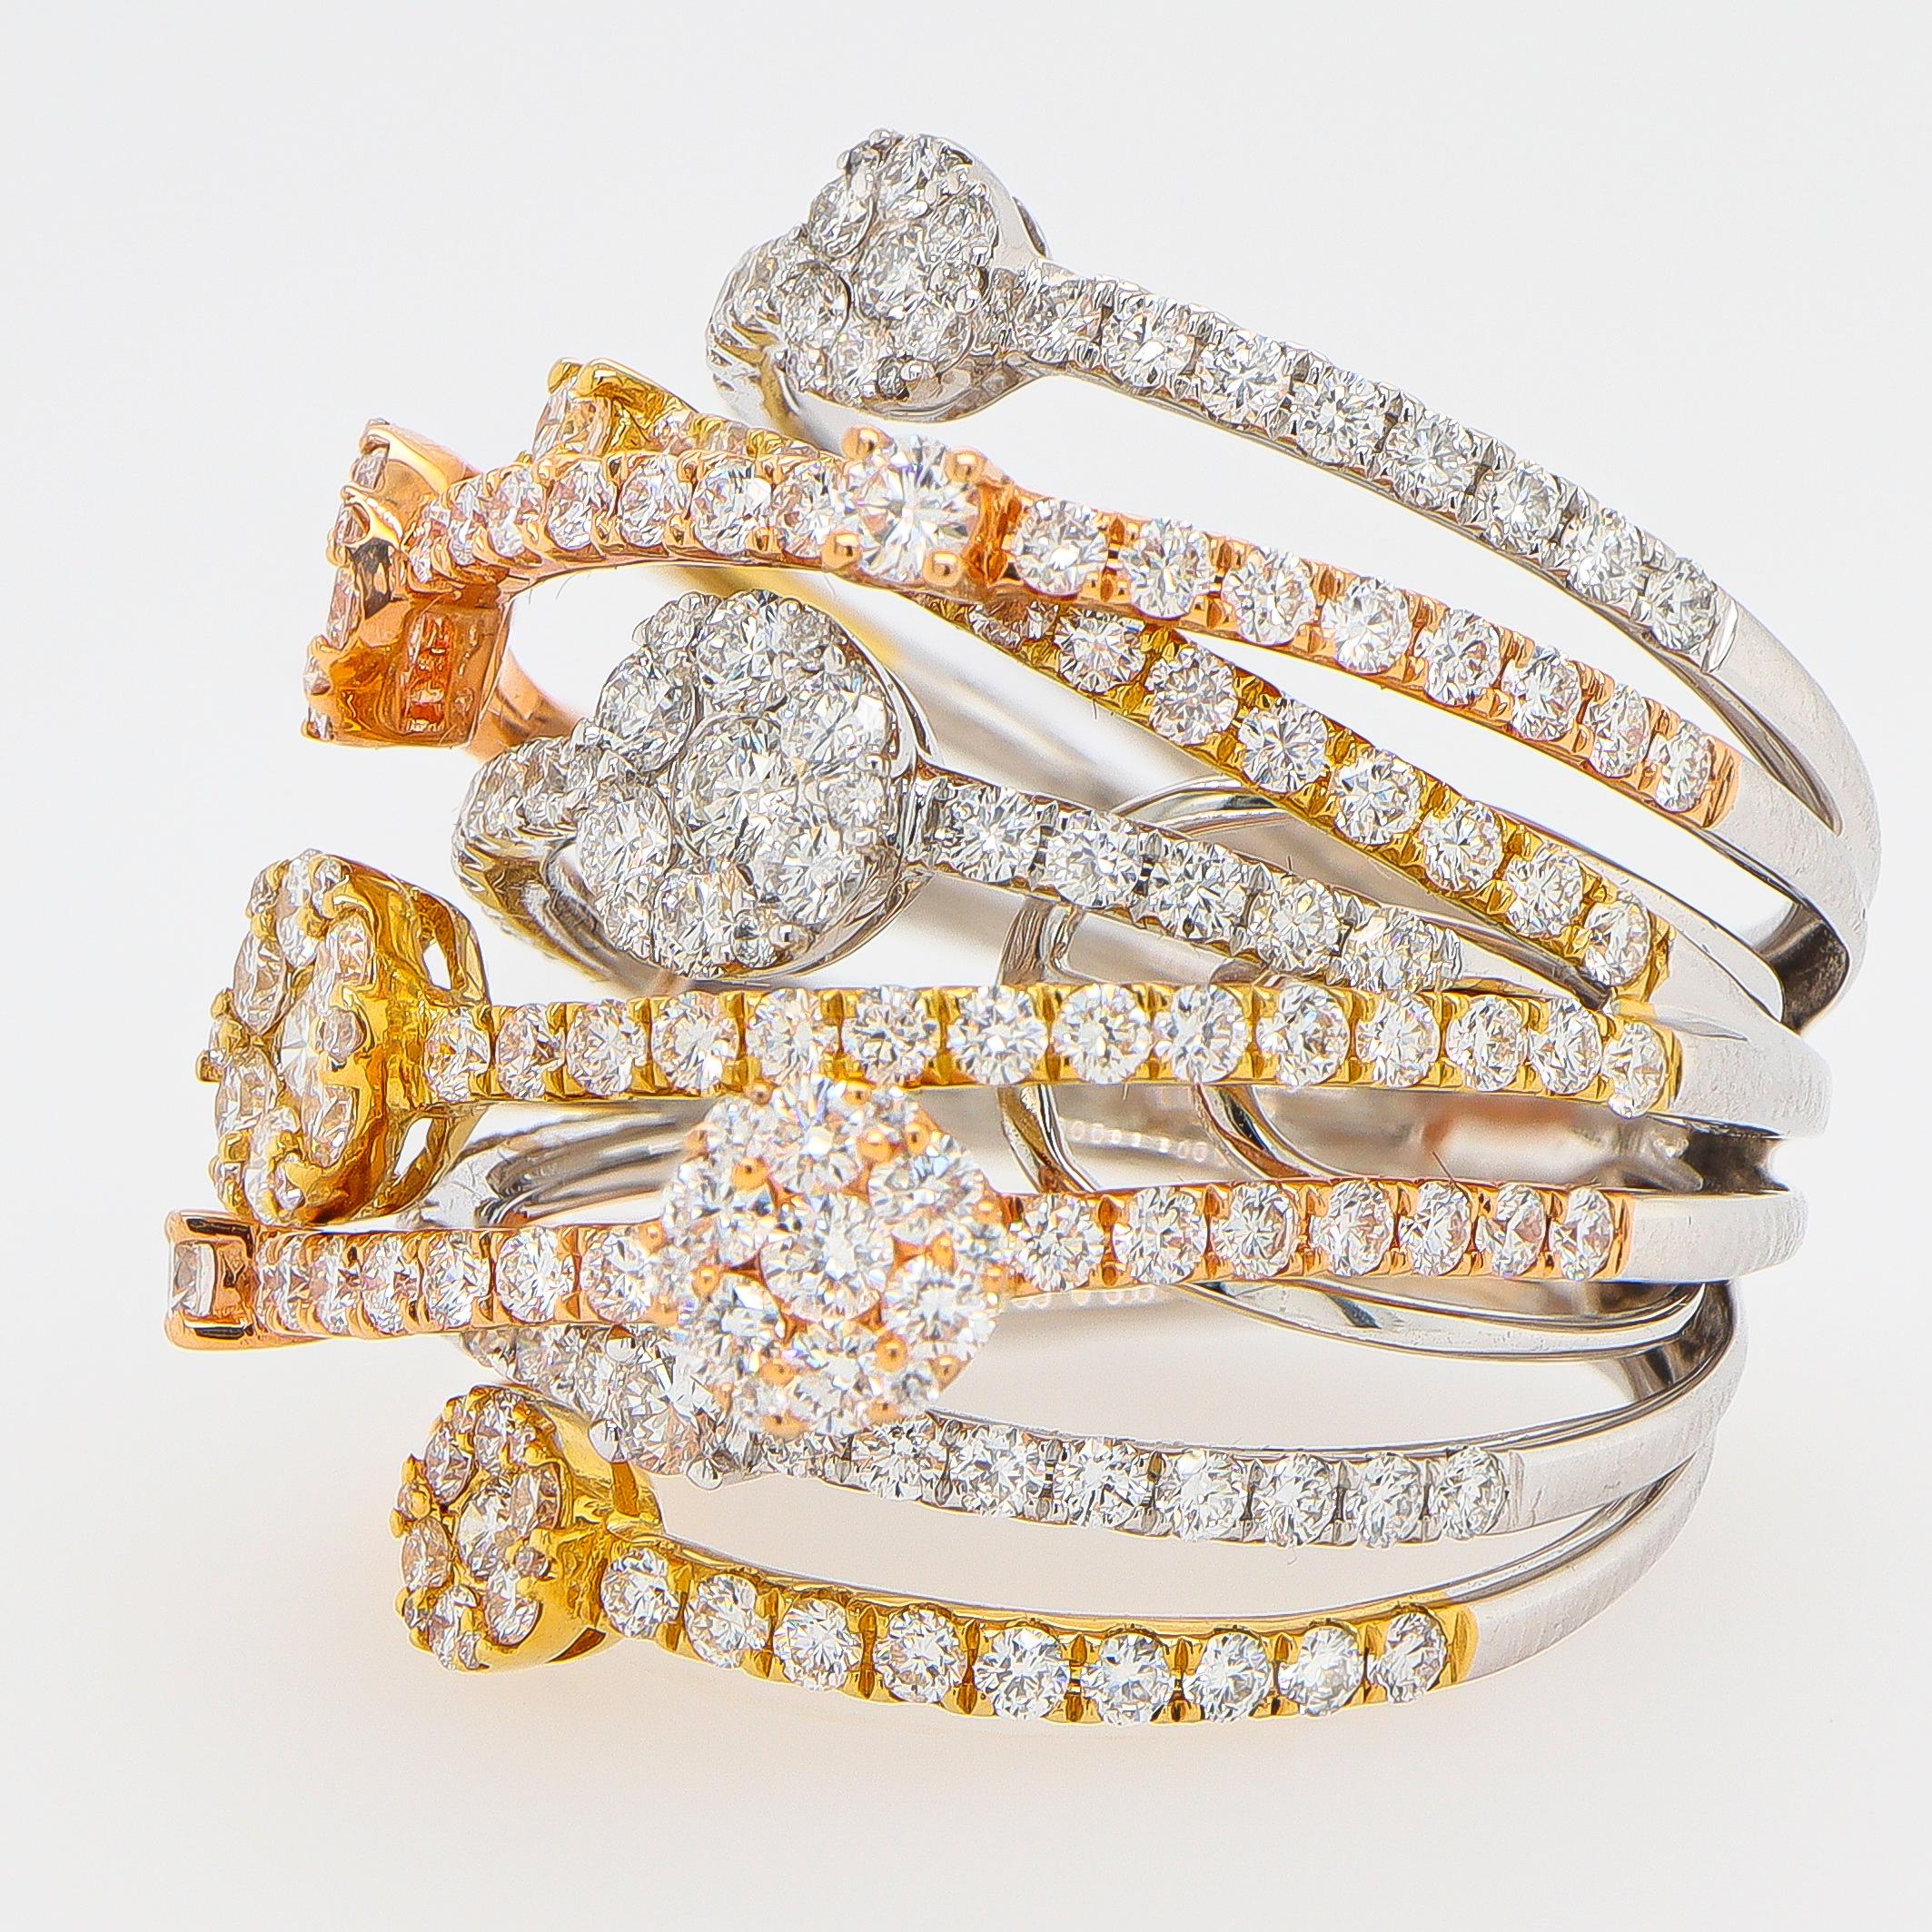 Beautiful Cocktail Ring Set With 241 Diamonds. It comes with an appraisal by GIA G.G.
Total Carat Weight is 3.26 Carats
Diamonds Color is F
Diamonds Clarity is VVS-VS
Metal is 18K Gold
Ring Size = 7 US
It can be resized complimentary 